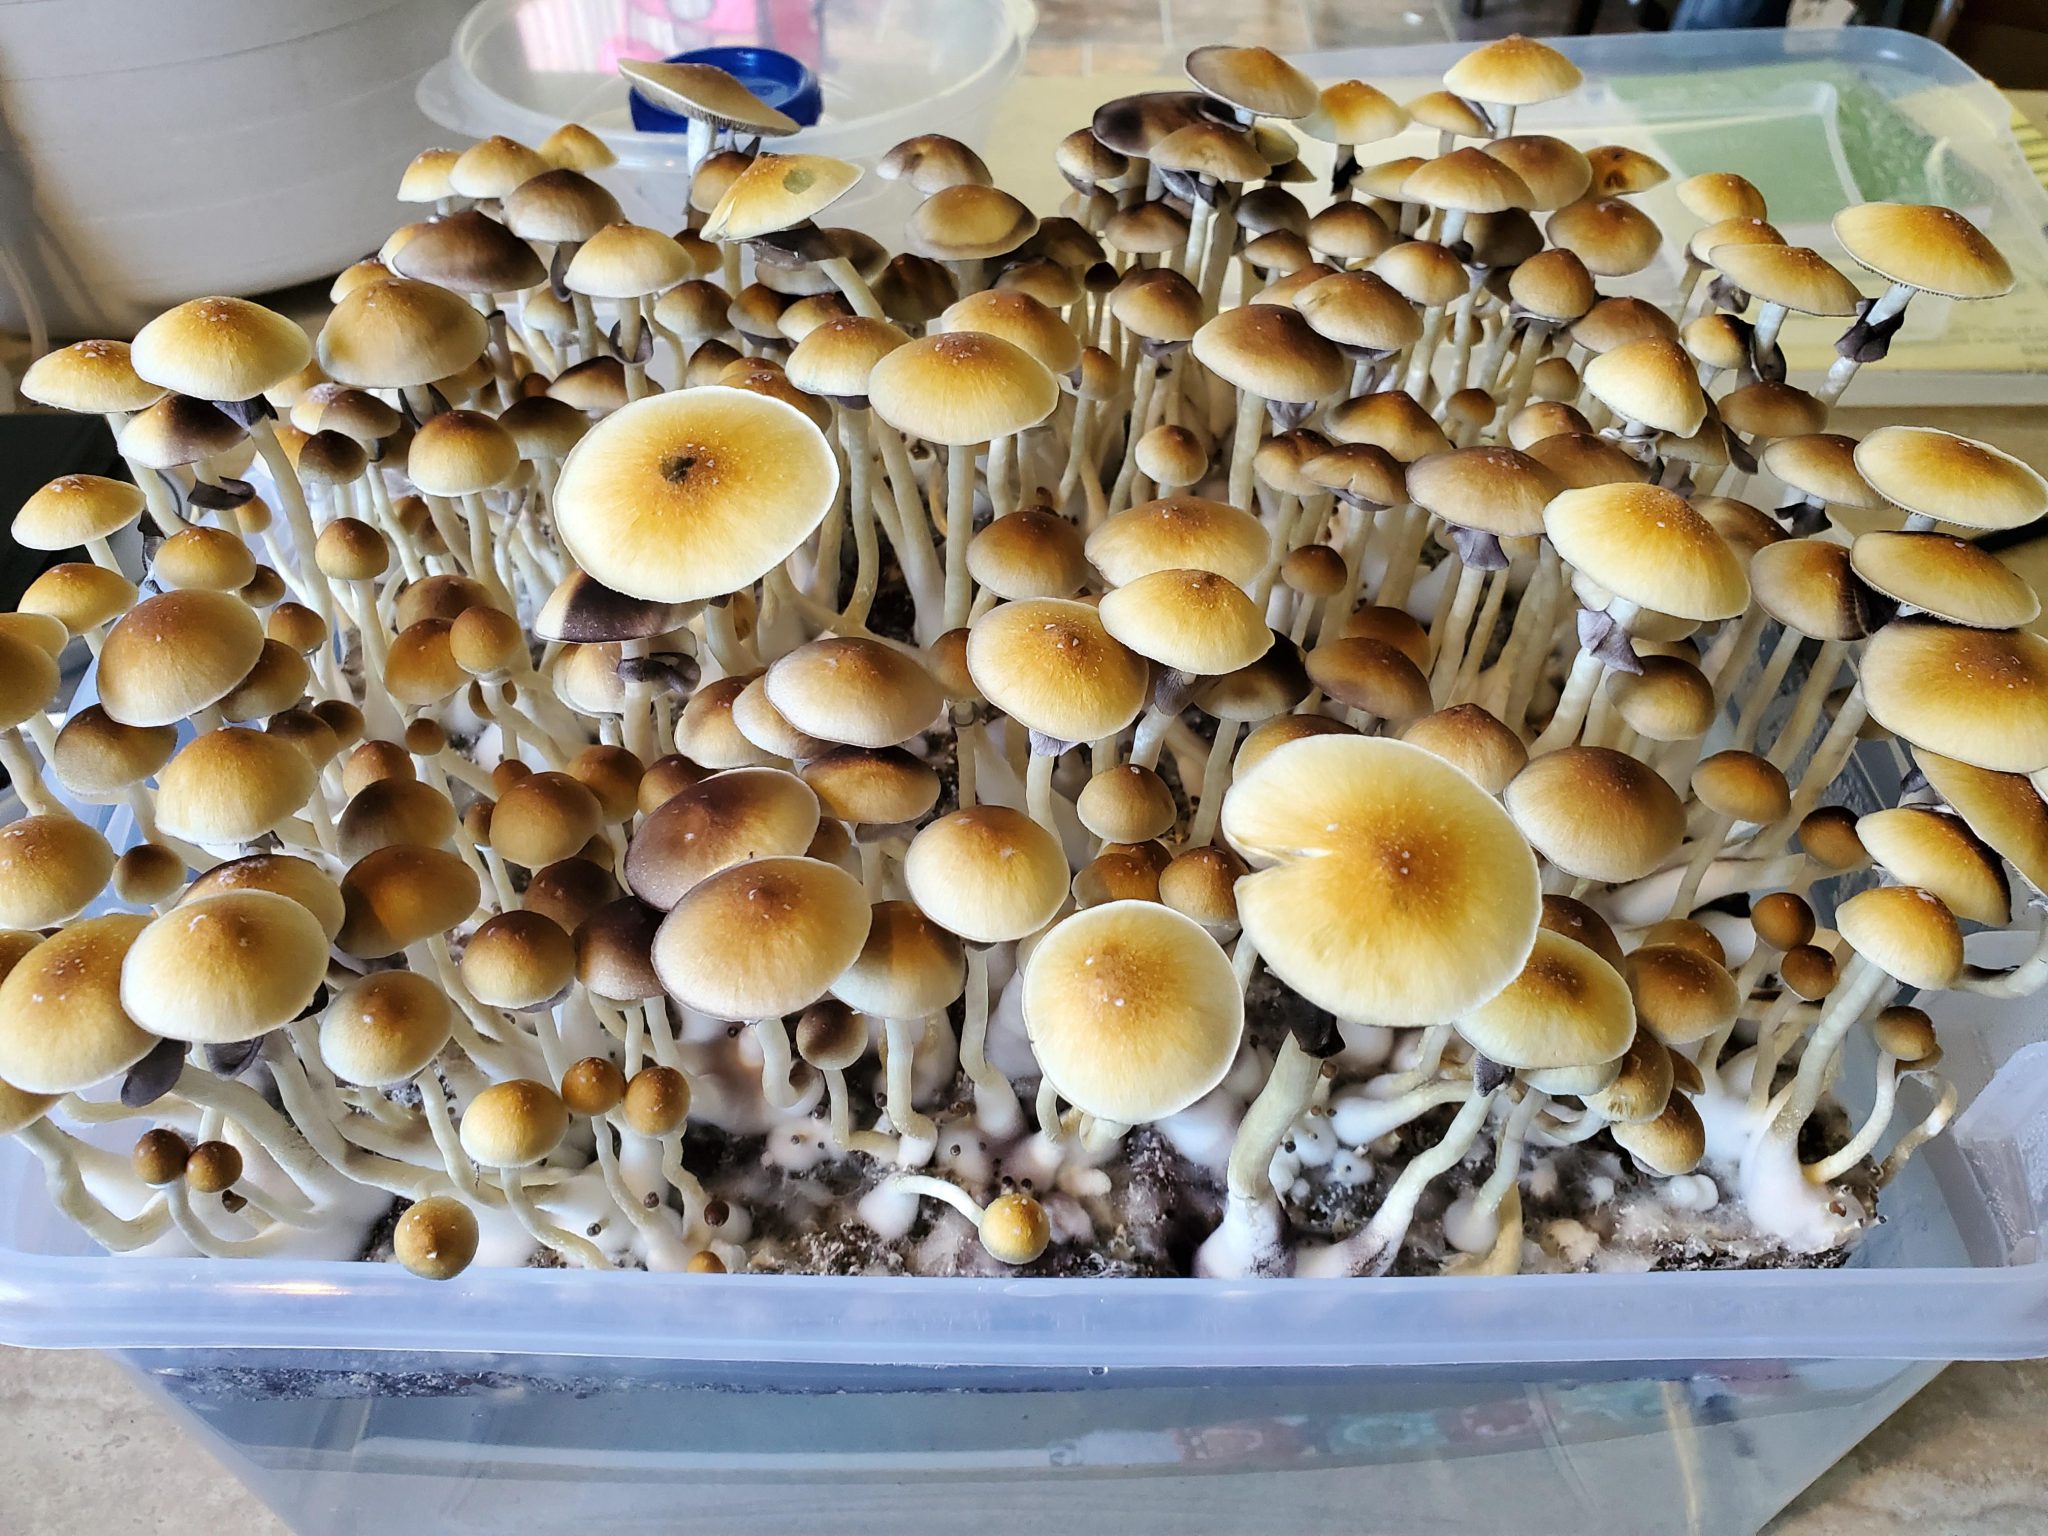 Blue Meanie Cubensis: Growing, Effects, Potency & Legality.